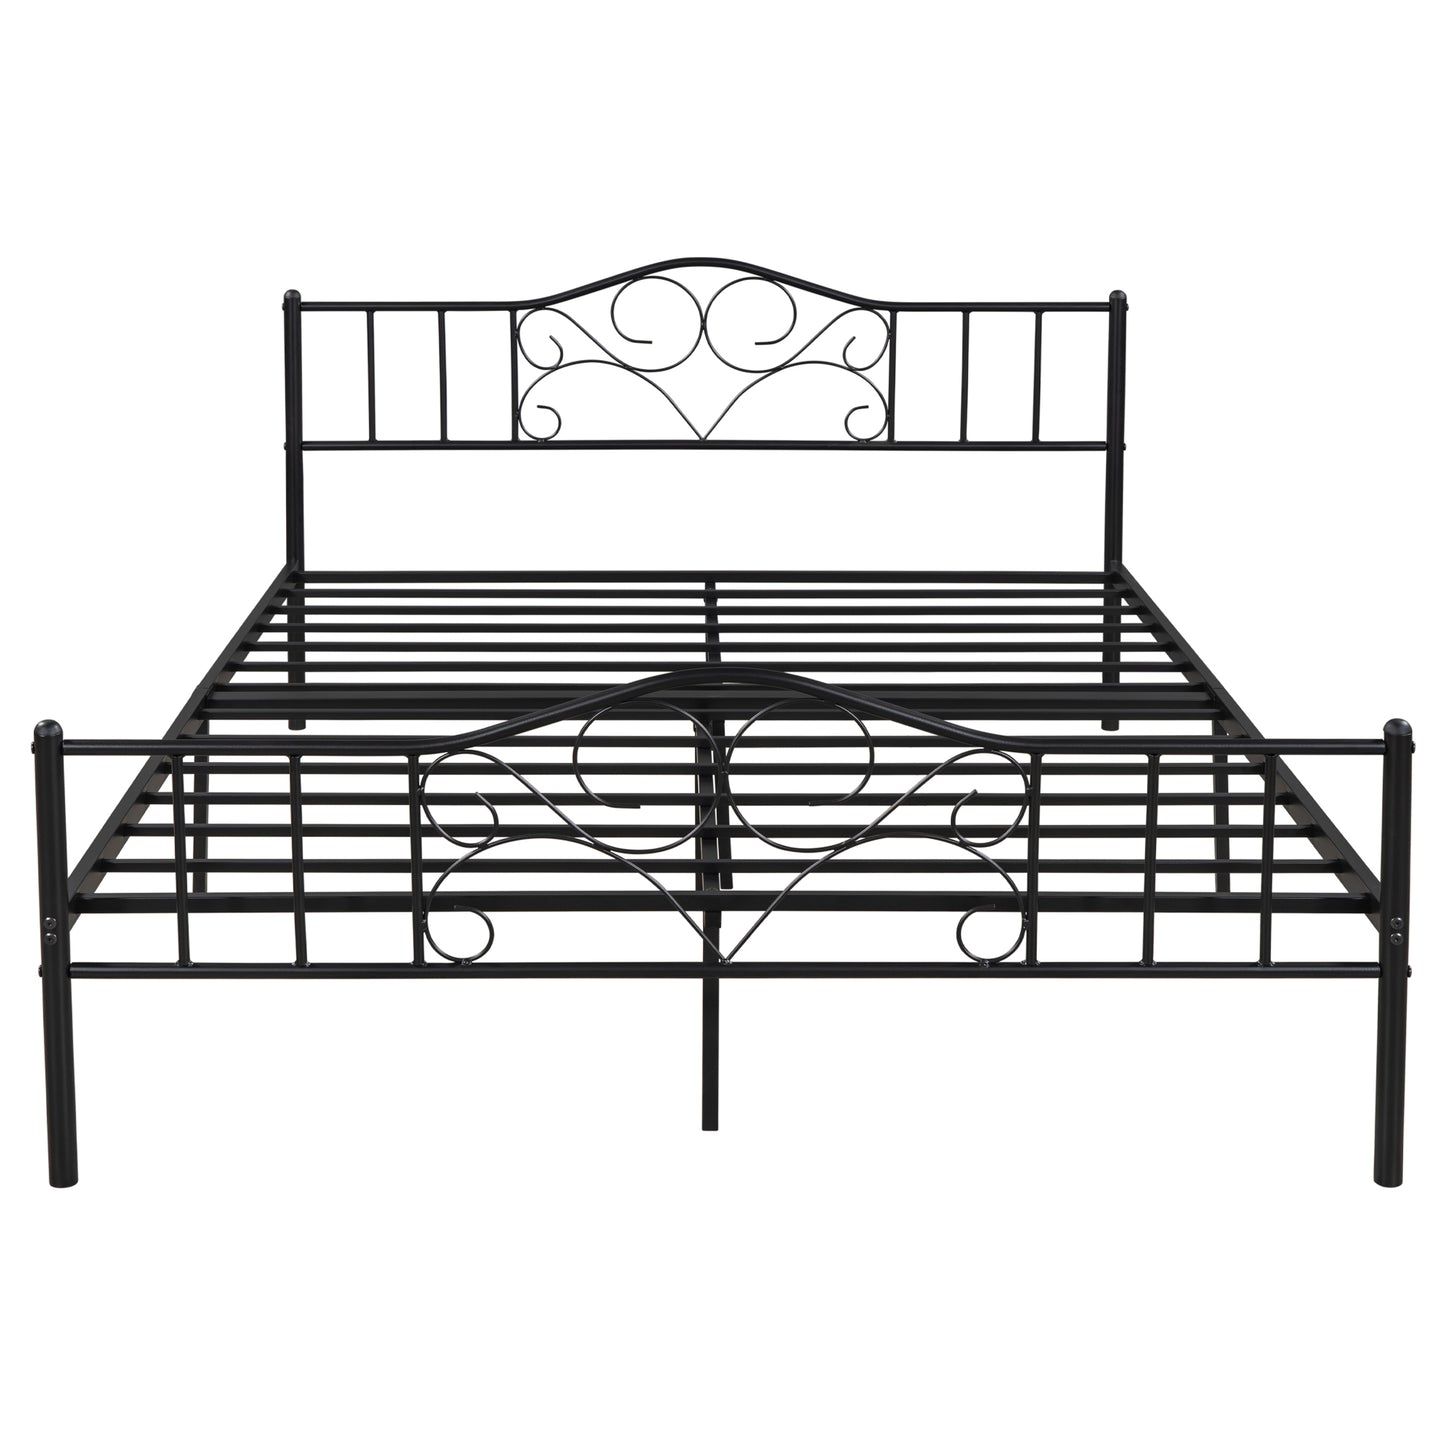 SYNGAR Queen Size Bed Frame, Modern Metal Platform Bed Frame Queen Size with Headboard and 500lb Weight Capacity, No Box Spring Needed